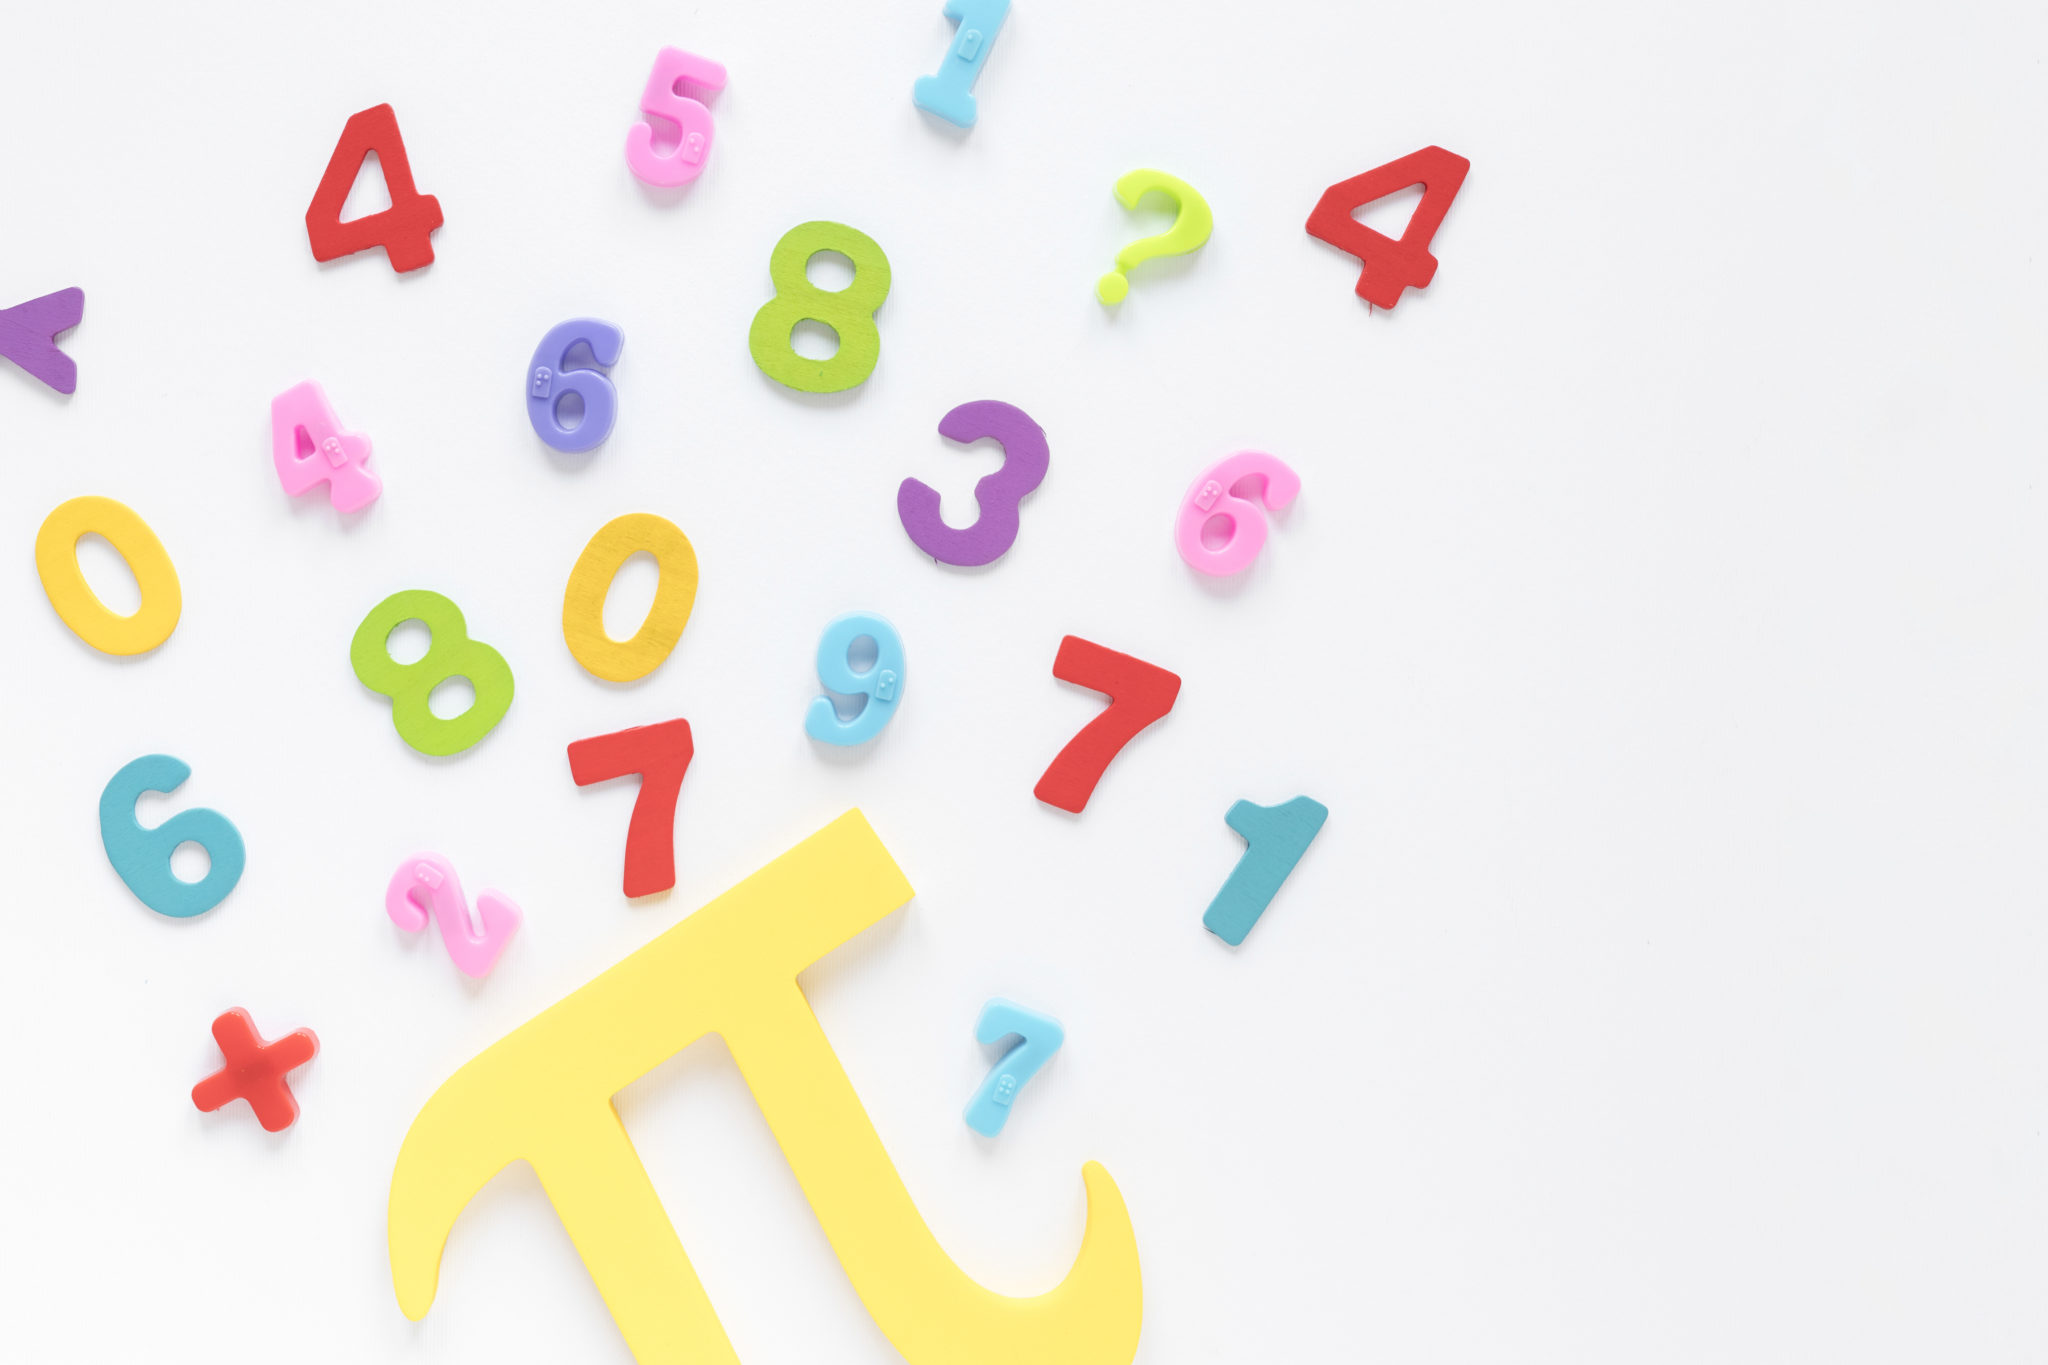 A large pi symbol surrounded by colorful numbers on a plain white background.